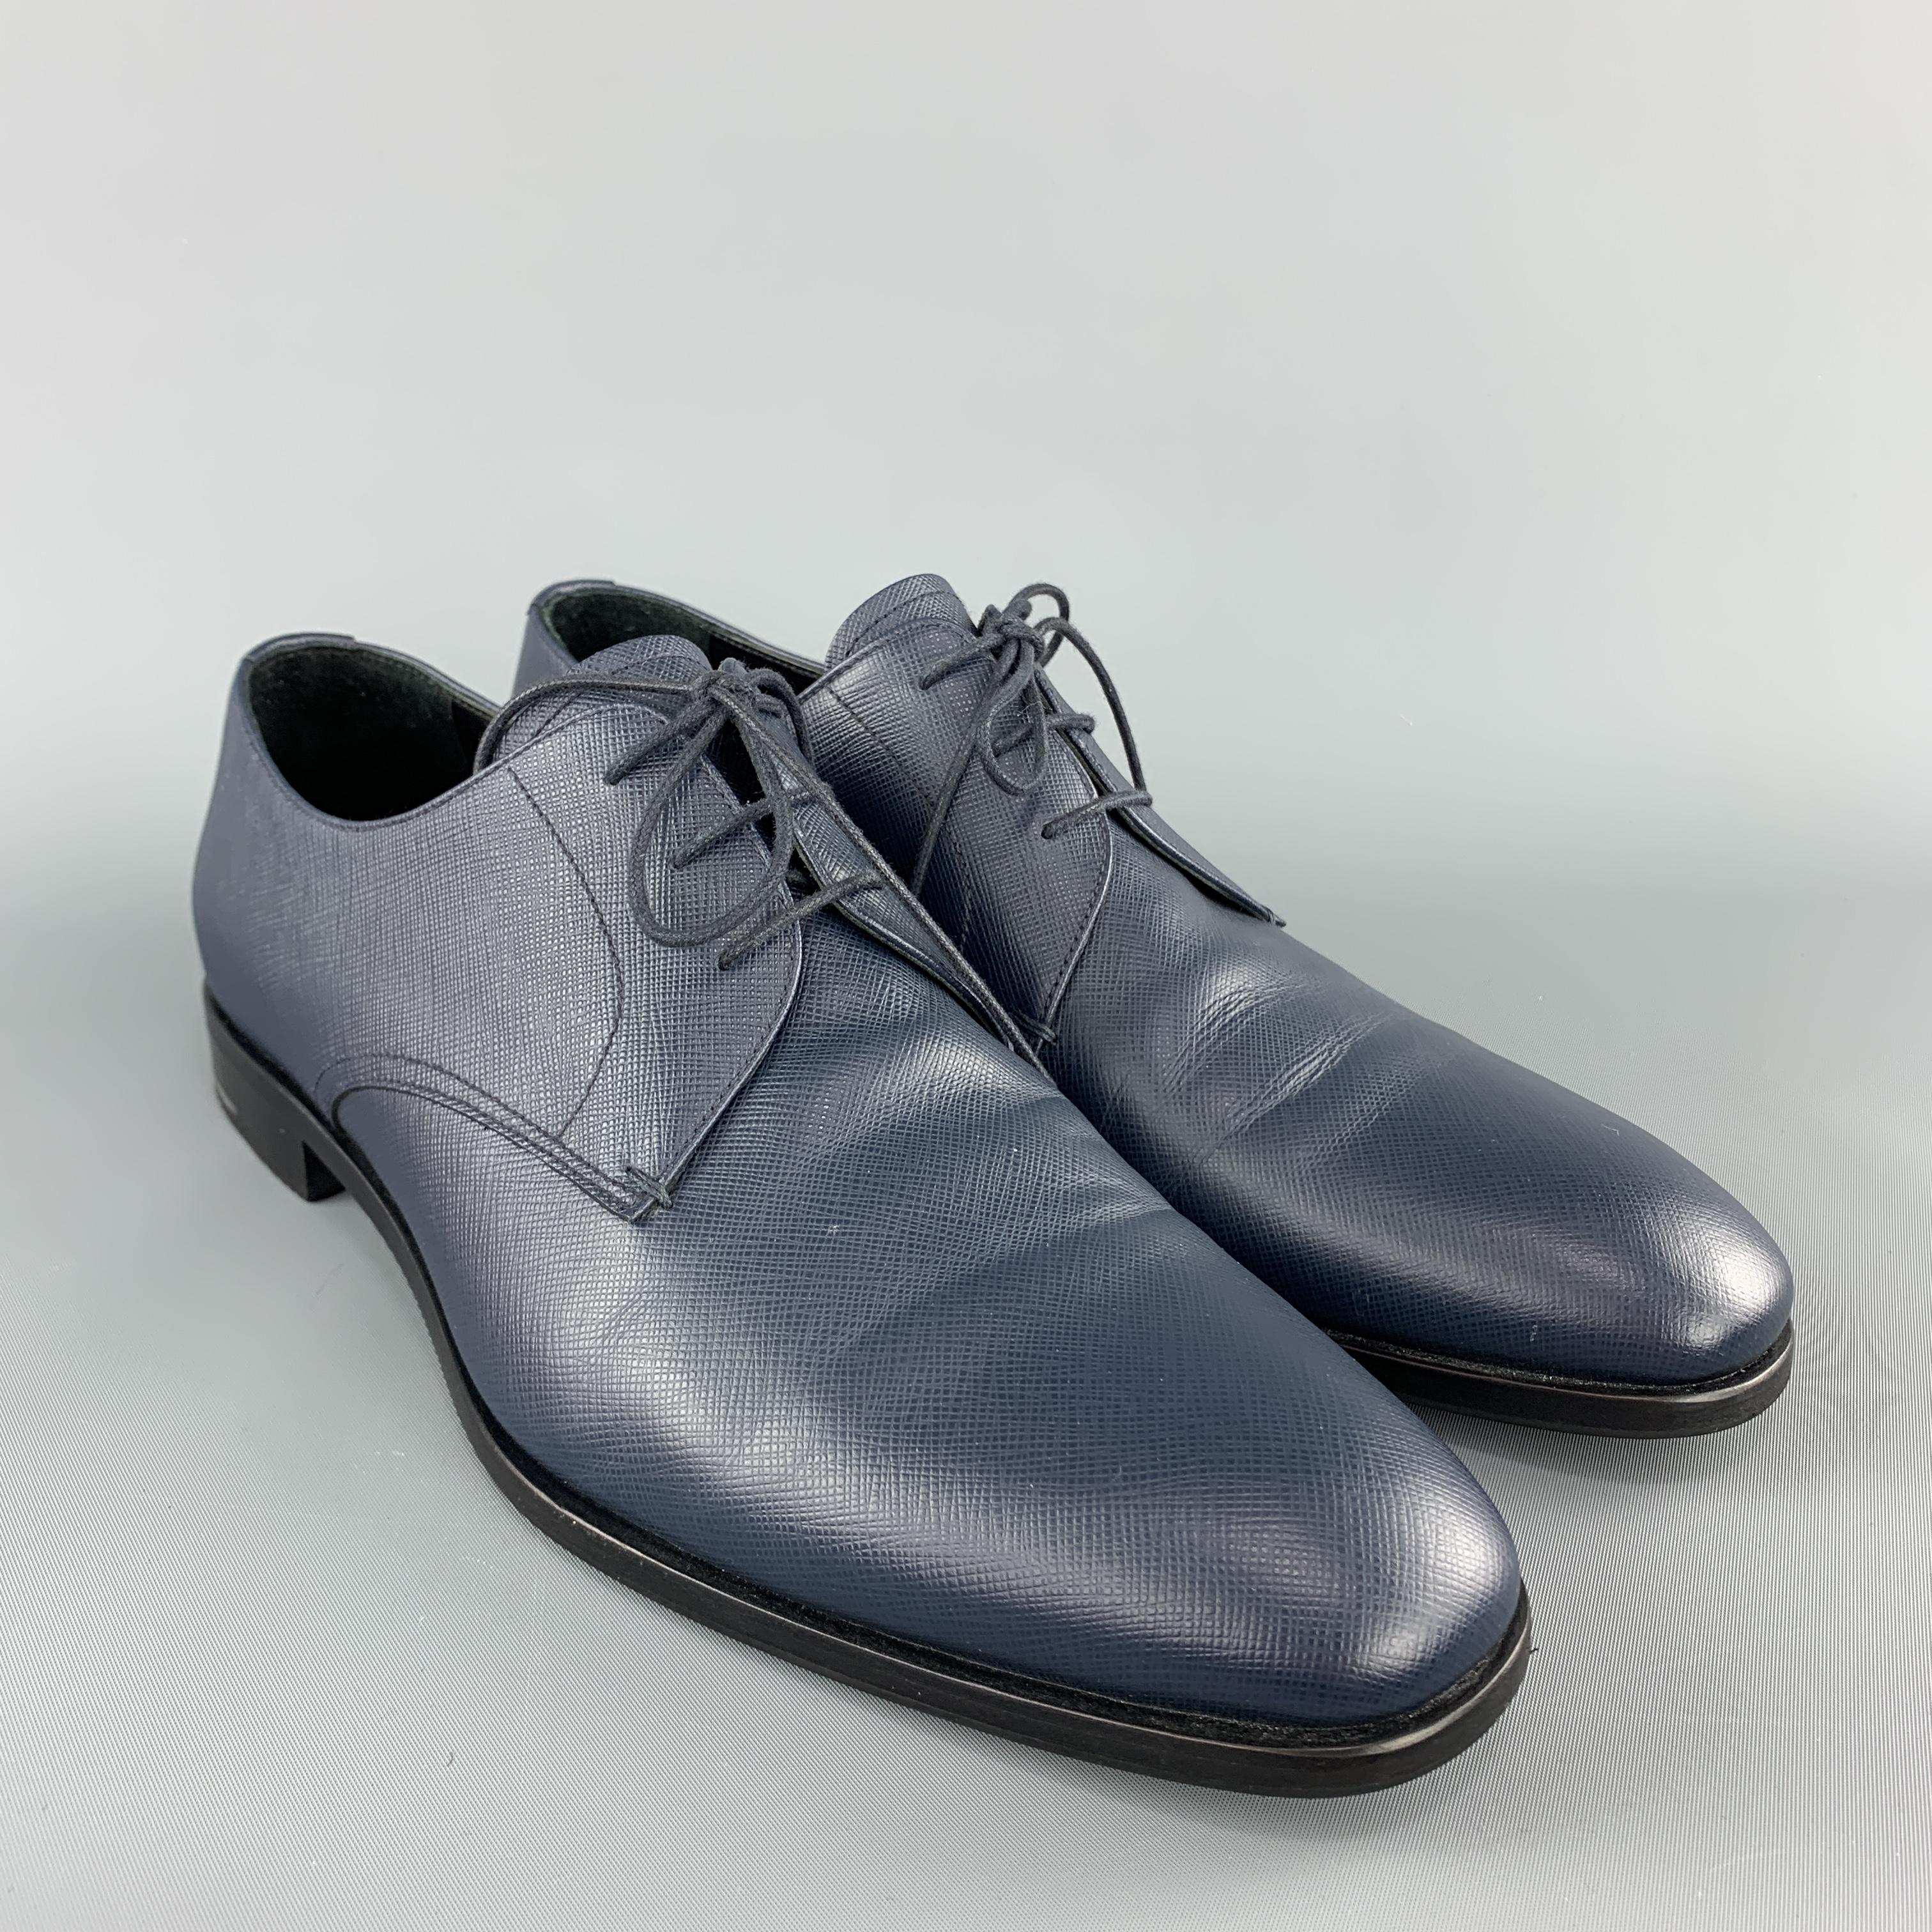 PRADA dress shoes come in navy Saffiano textured leather with a lace up front and squared point toe. Made in Italy.

Excellent Pre-Owned Condition.
Marked: UK 9 

Outsole: 12 x 4 in.